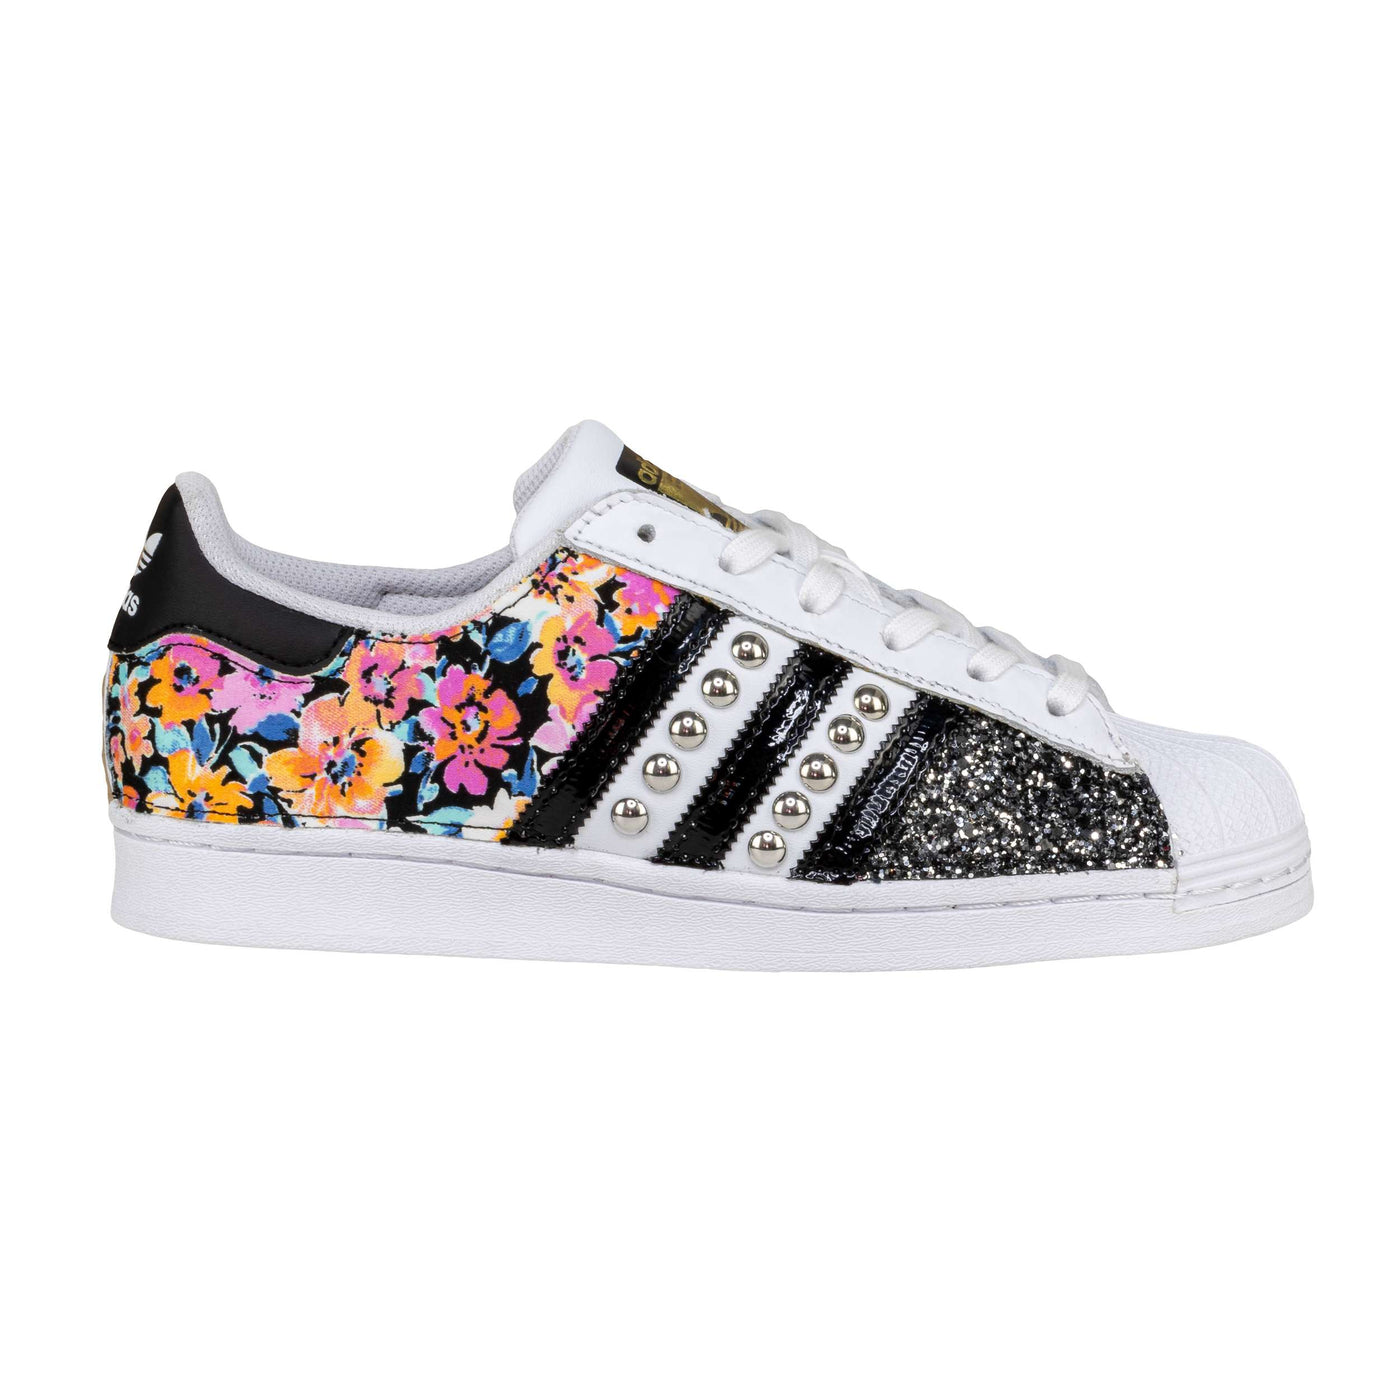 ADIDAS SUPERSTAR PERSONALIZZATE TAYLOR